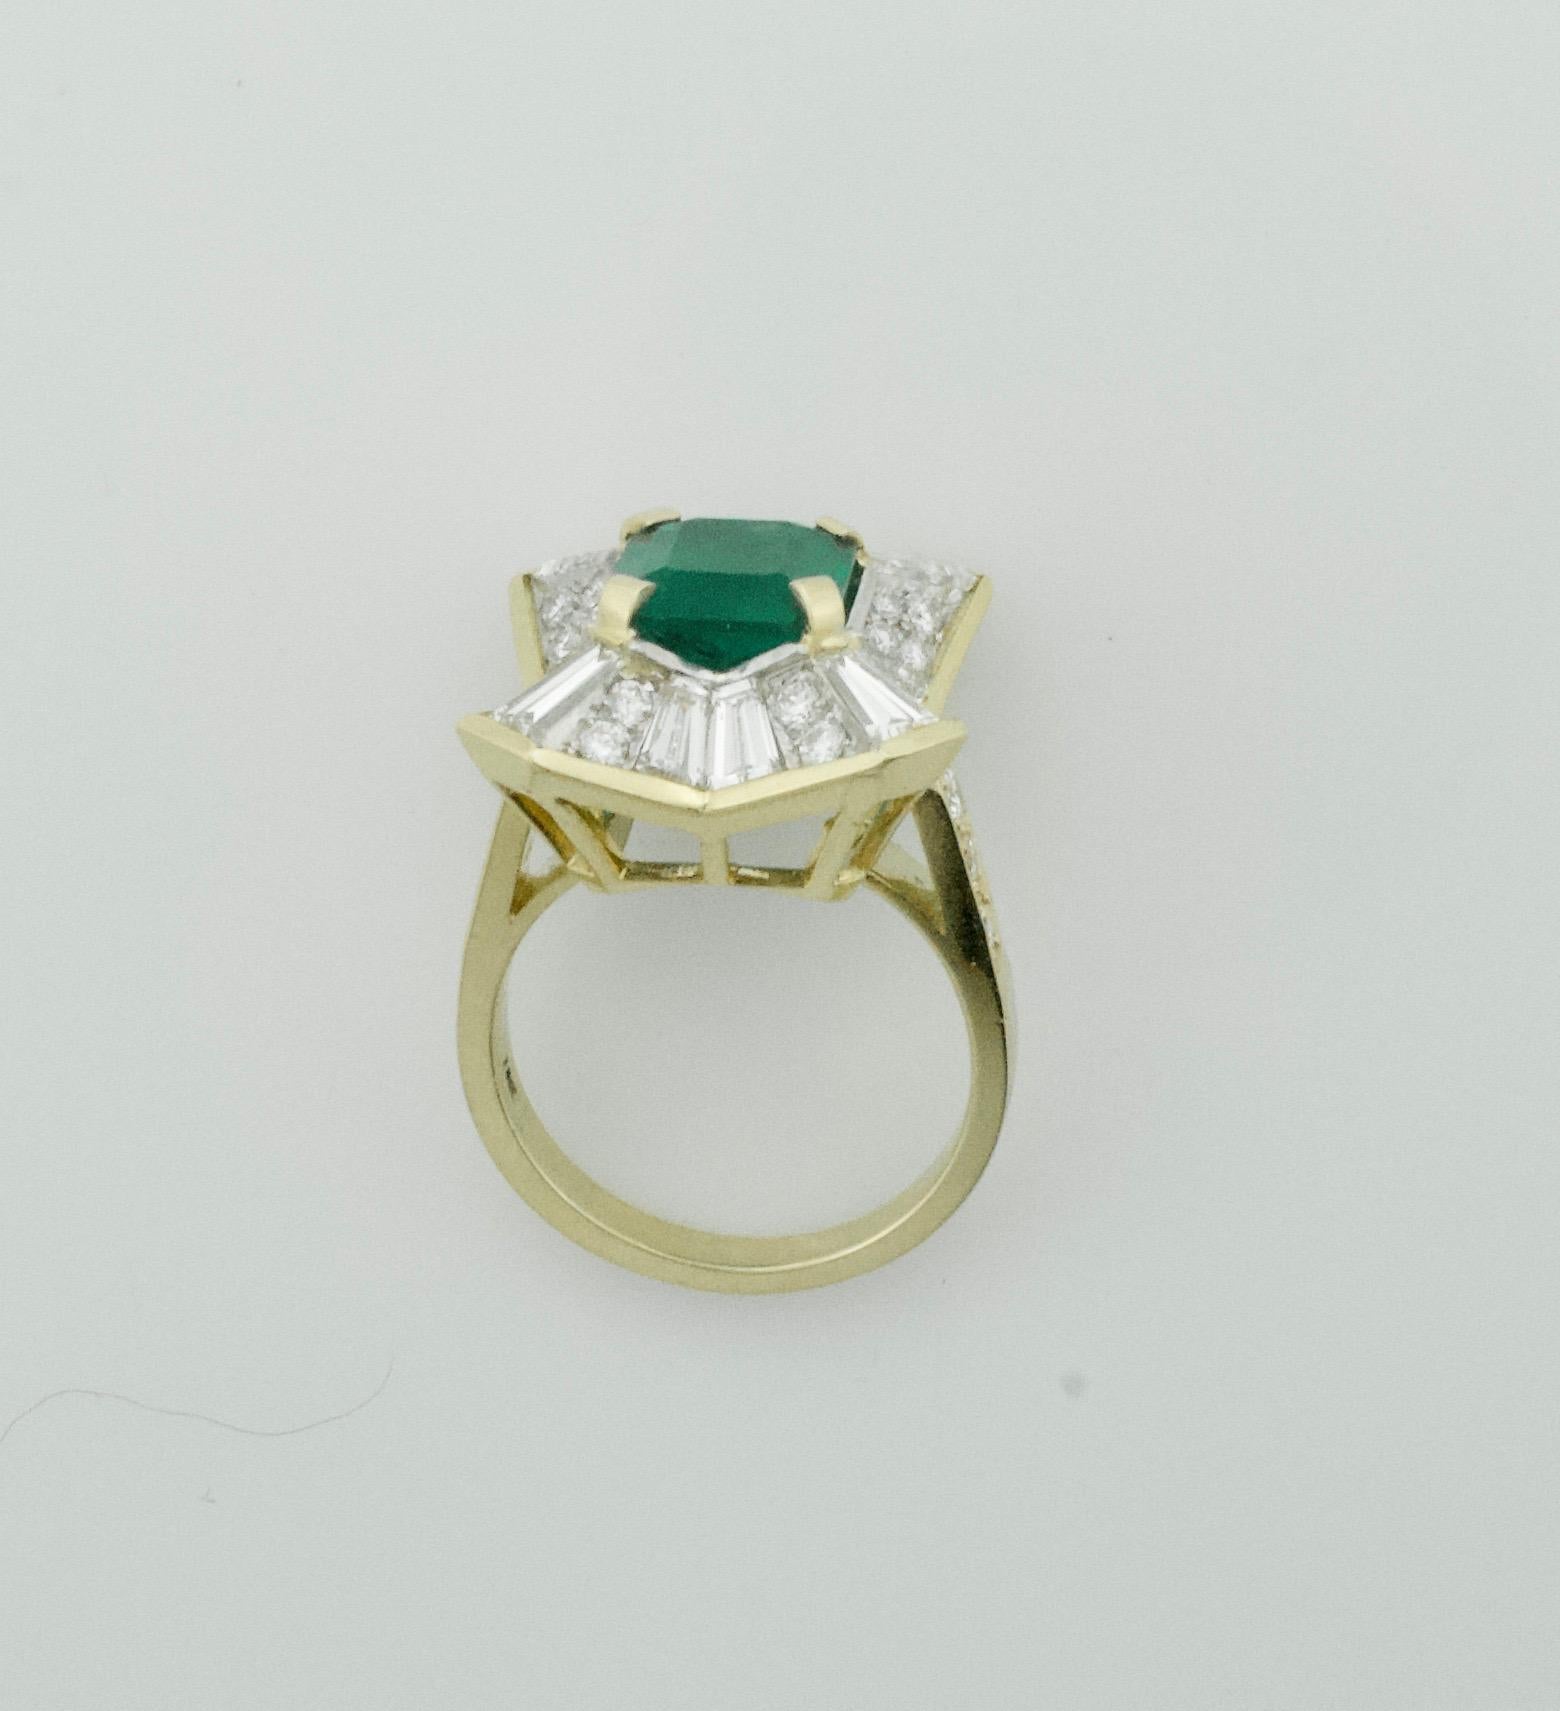 Colombian Emerald and Diamond Ring 3.27 with GIA Certification in 18k
One Emerald Cut Colombian Emerald  weighing 3.27 carats [Beautiful Colombian Color]
Twelve tapered Baguette Diamonds weighing 2.00 carats approximately
Thirty Round Brilliant Cut